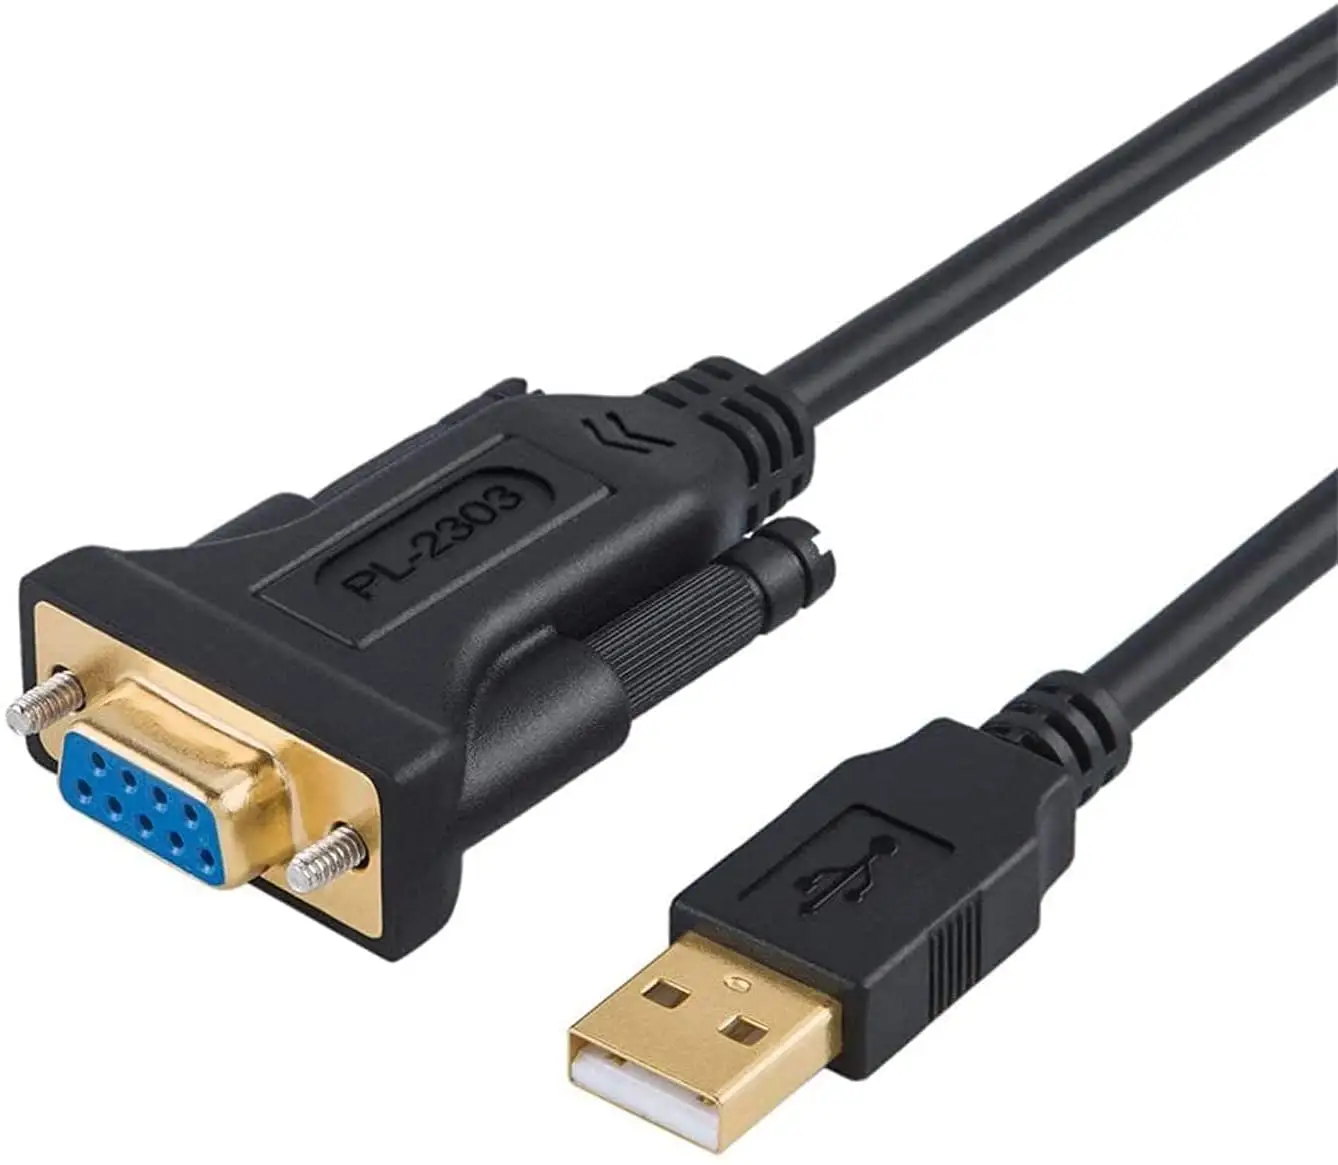 USB to RS232 Adapter with PL2303 Chipset, CableCreation 6.6ft USB 2.0 Male to RS232 Female DB9 Serial Converter Cable